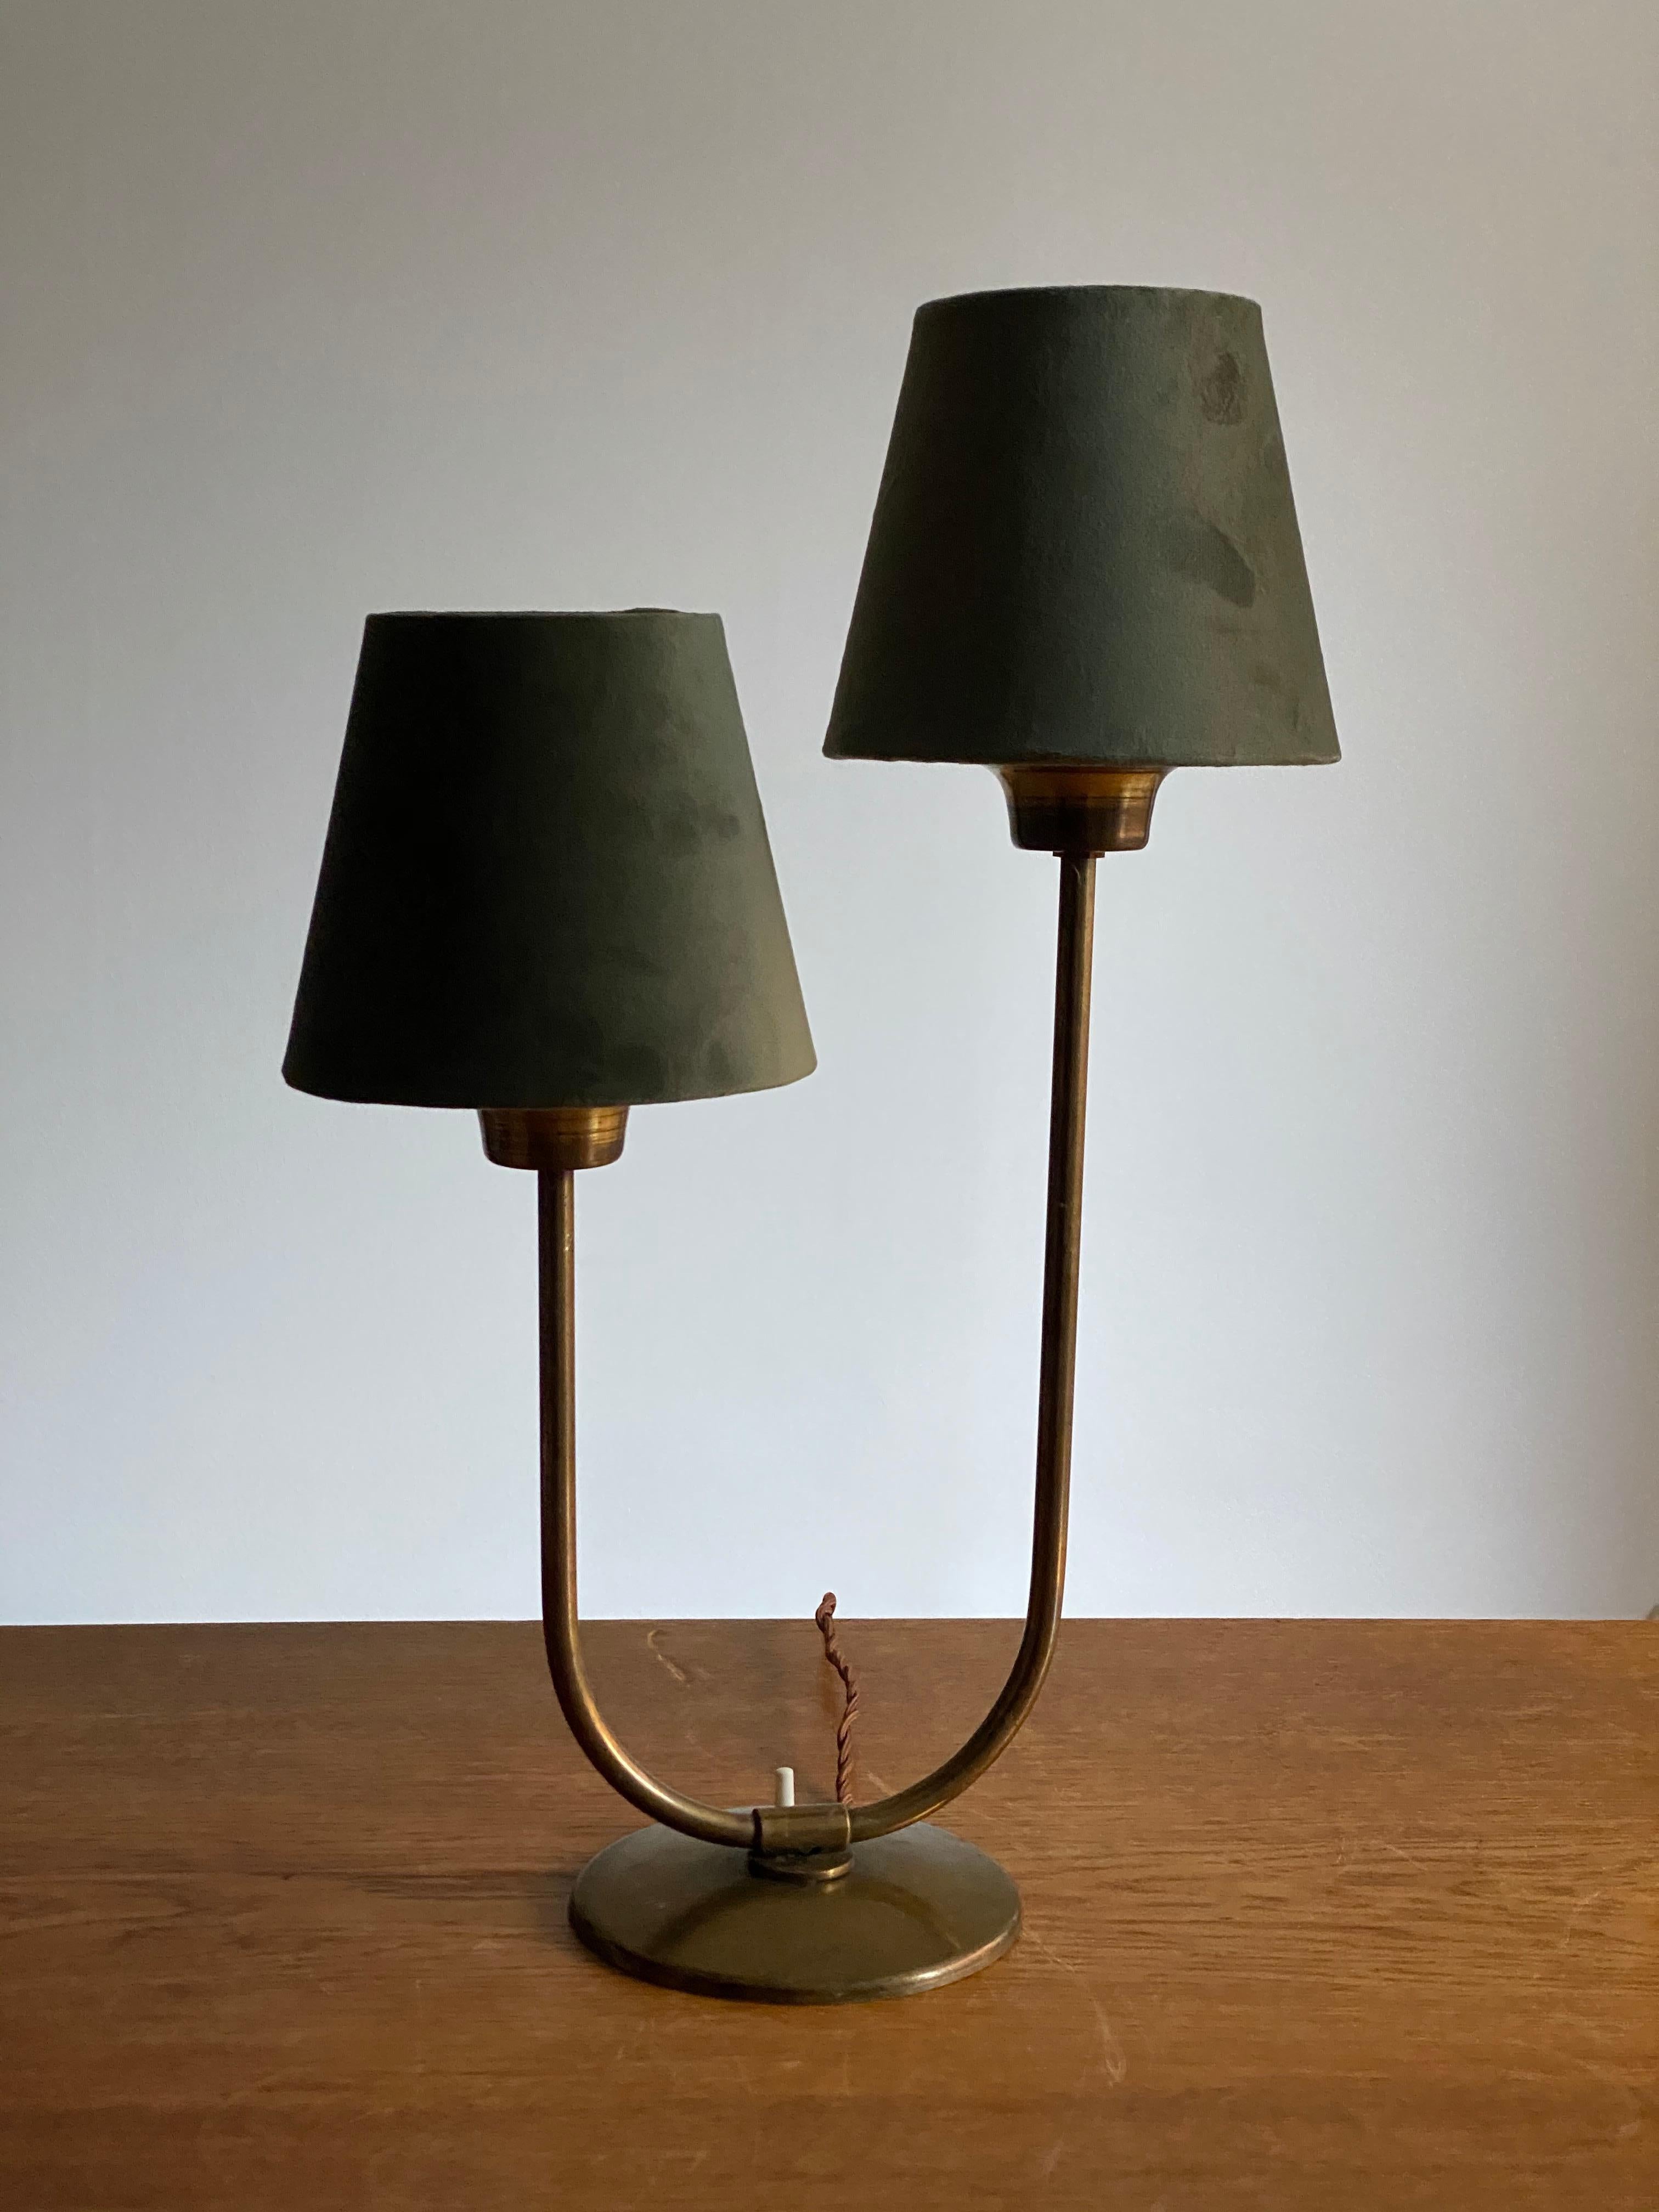 A table lamp or desk light. In brass, two armed. Lampshades in green velvet.

Other designers of the period include Josef Frank, Paavo Tynell, Hans Bergström, Böhlmarks.